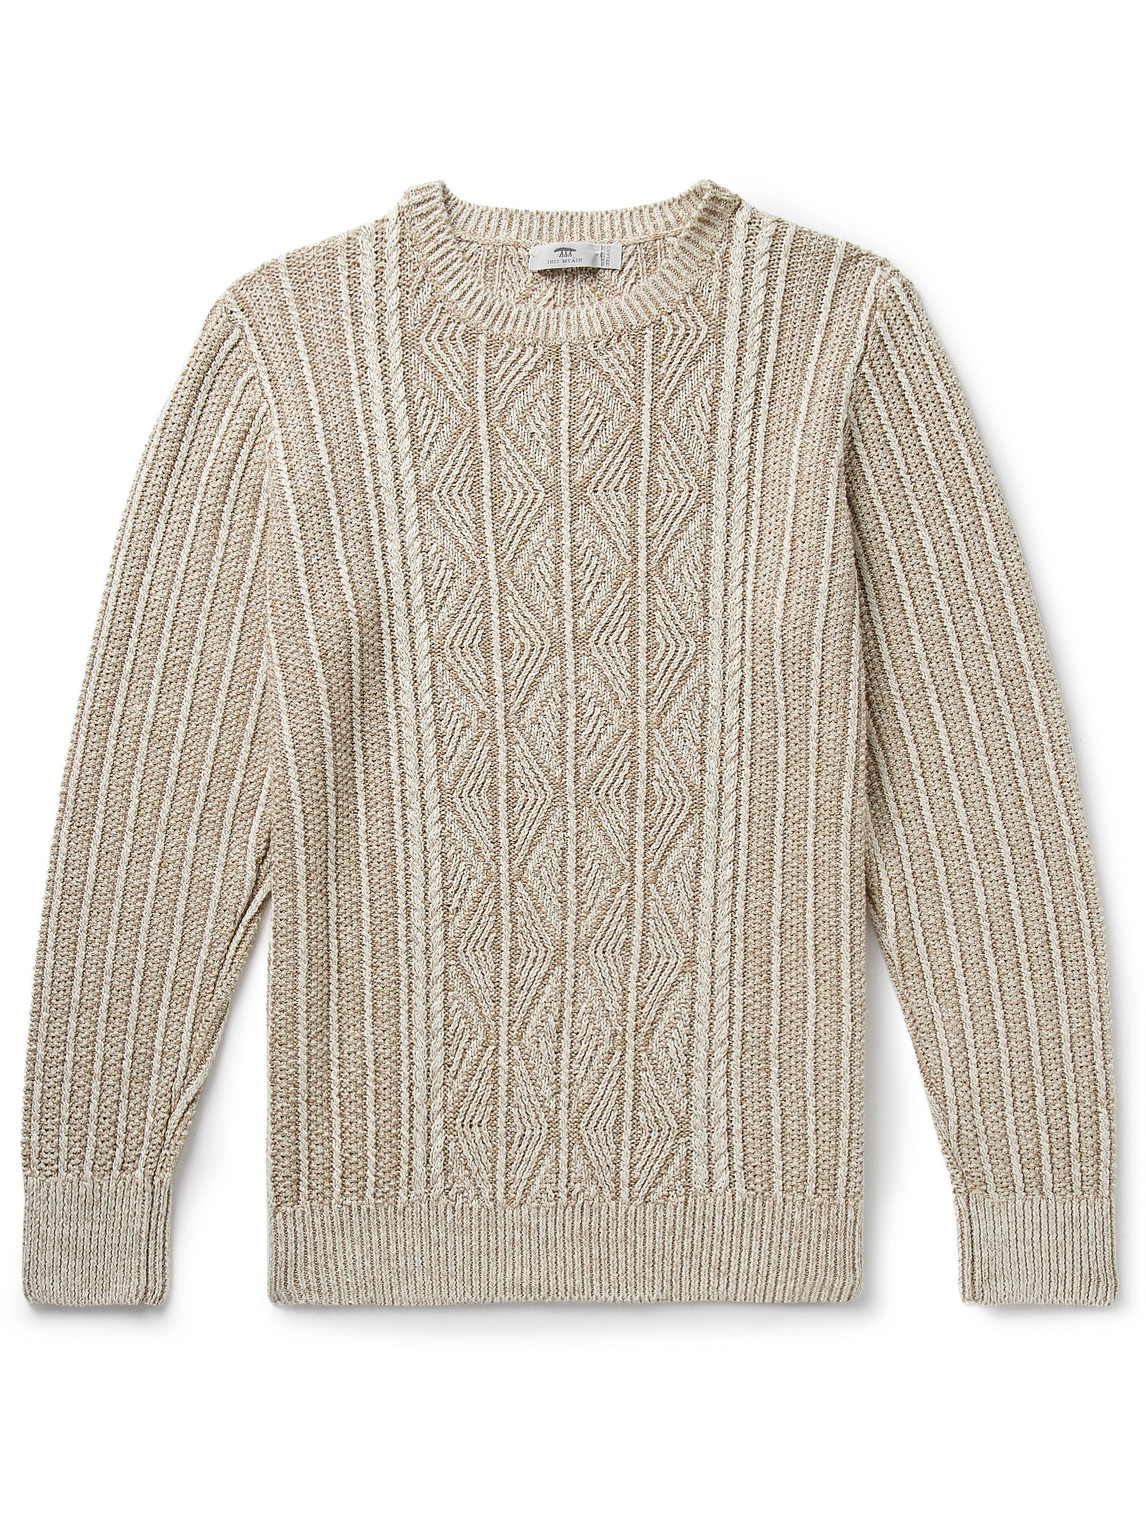 Inis Meáin Aran Cable-Knit Linen Sweater